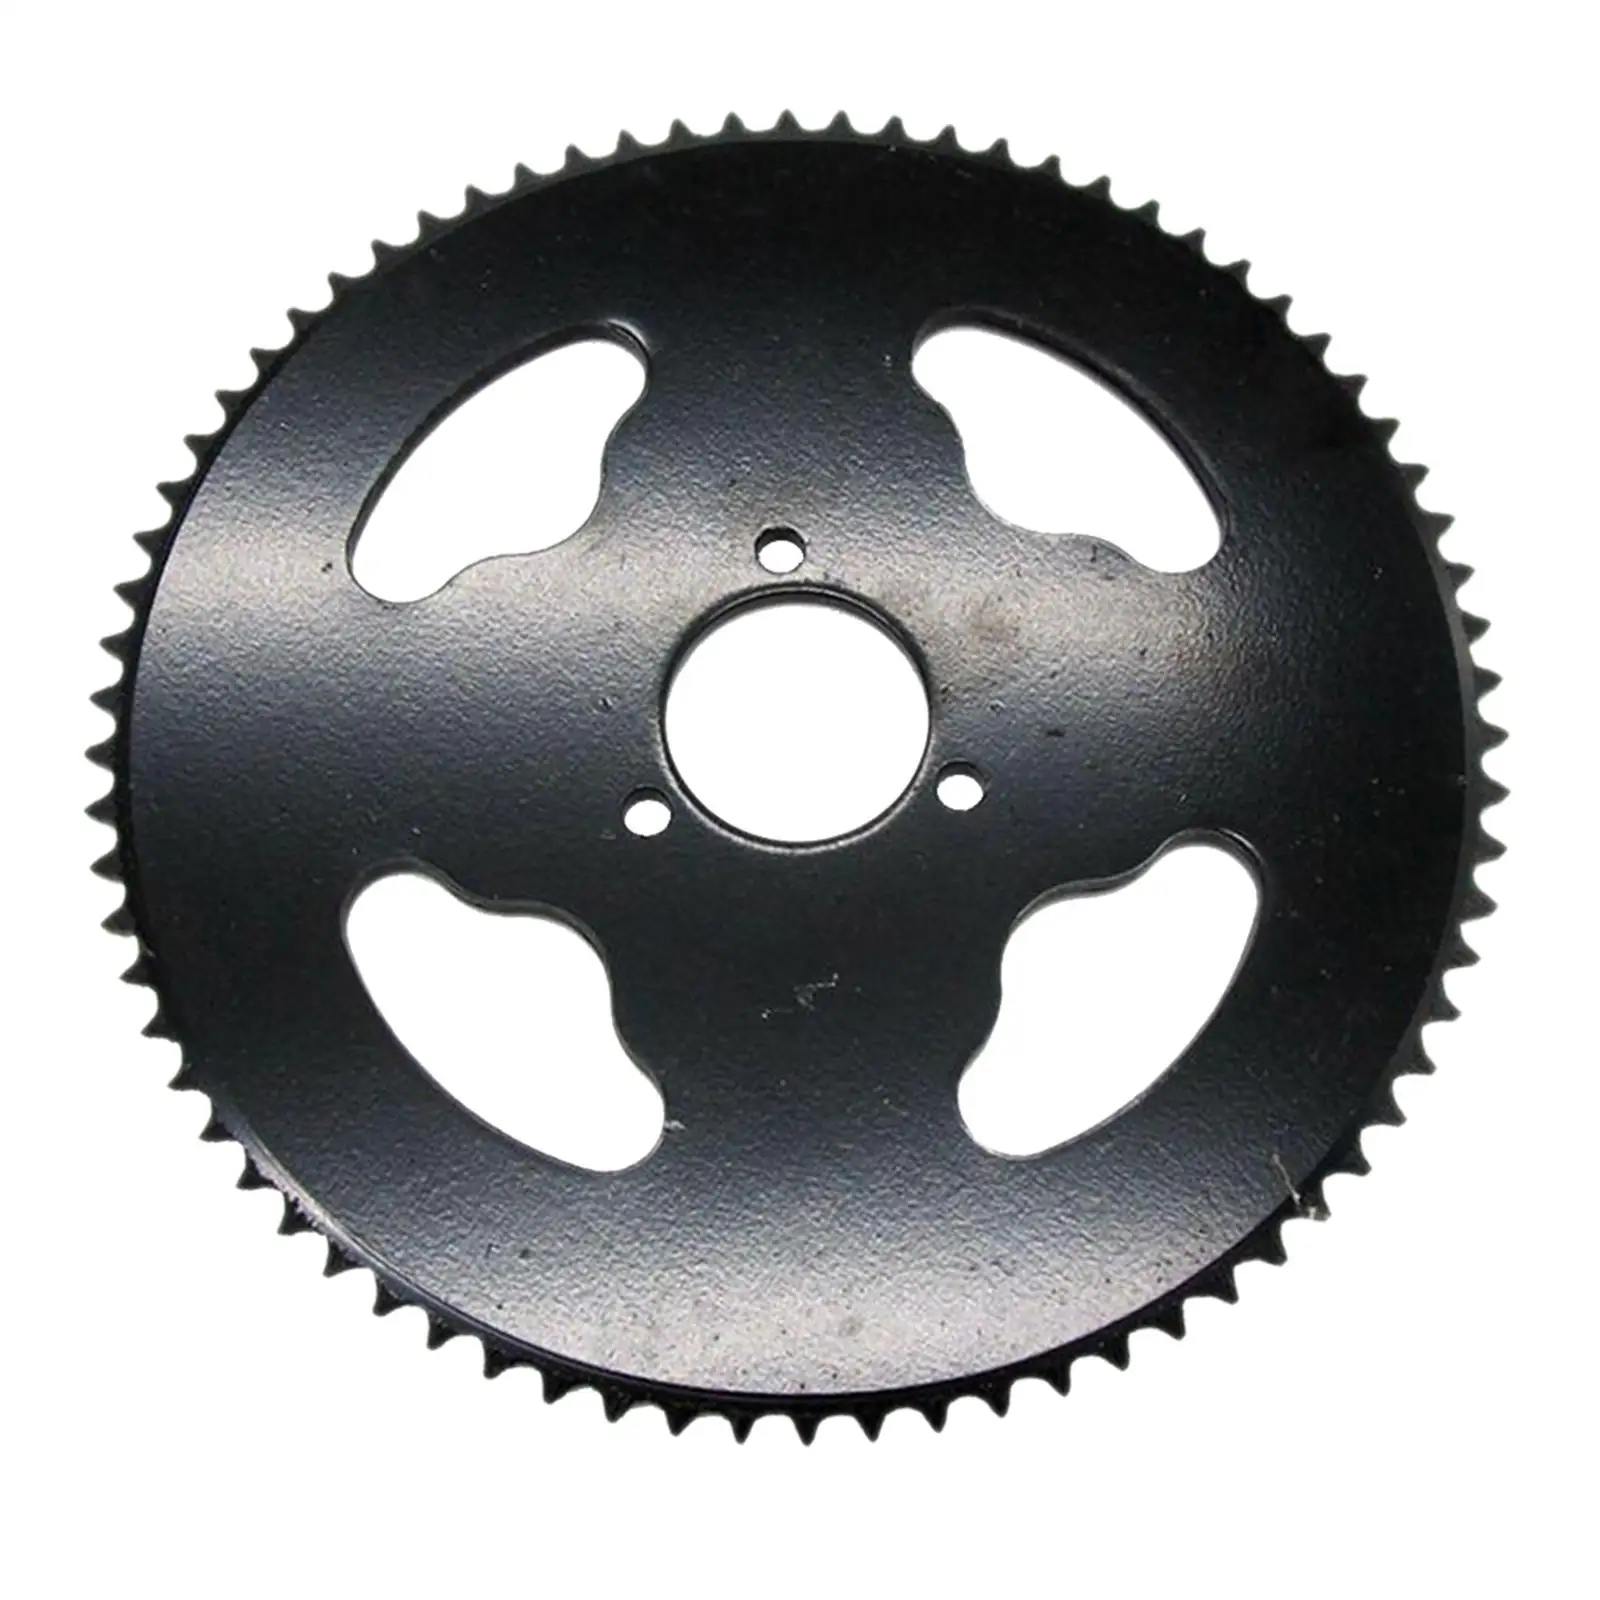 Durable 74T 35mm Chain Sprocket for 47cc 49cc Mini Moto Pocket Bike Scooter